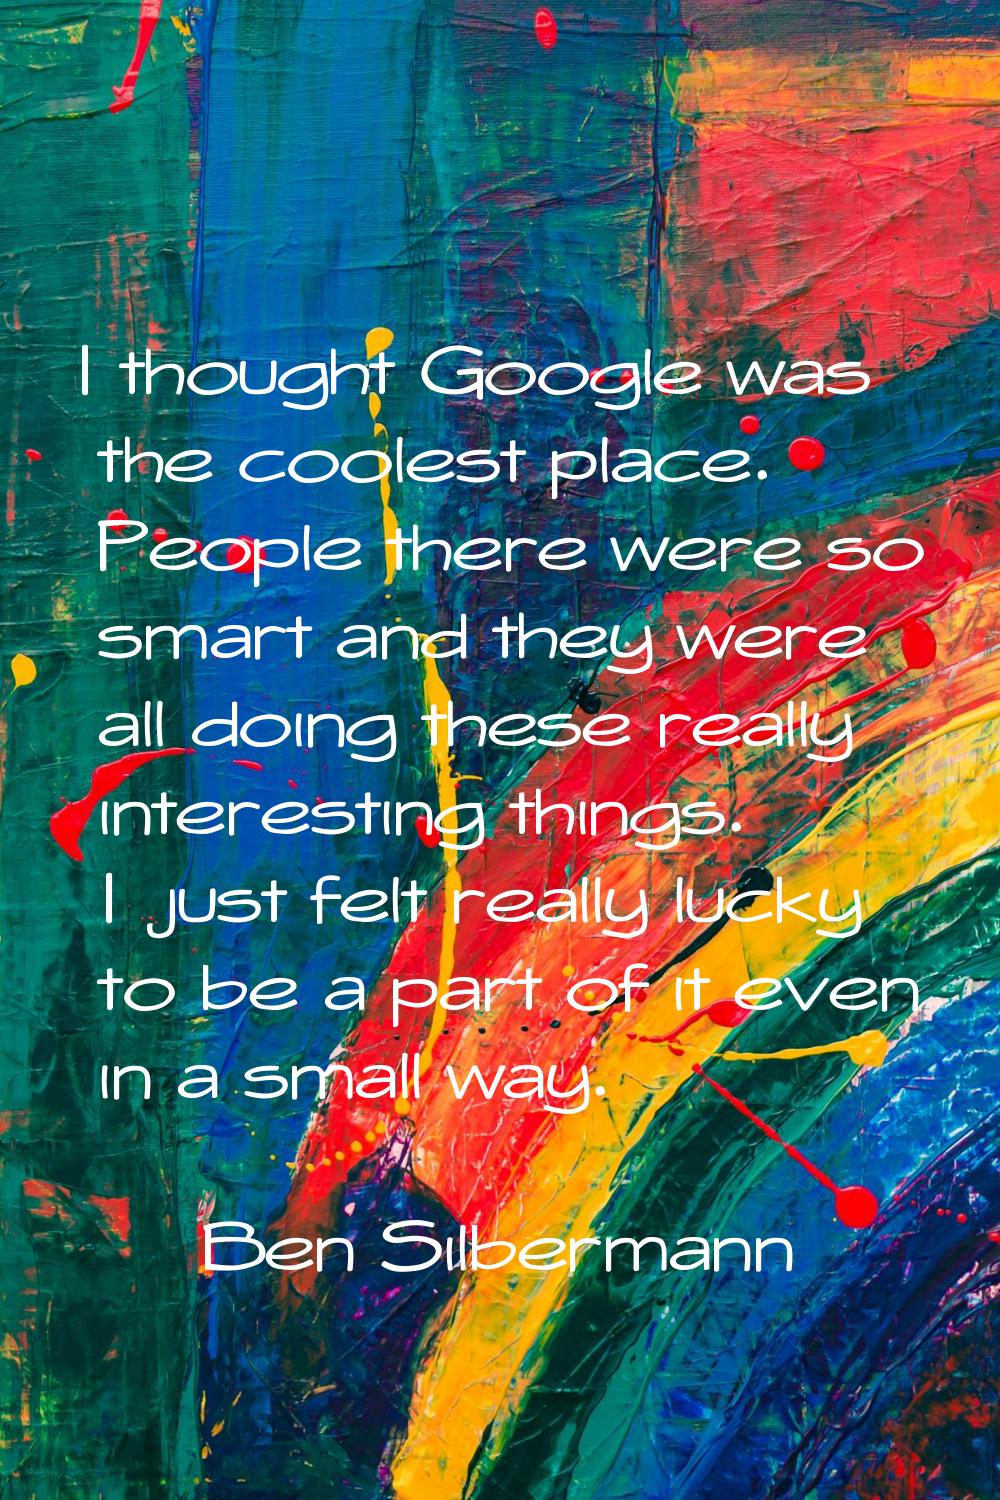 I thought Google was the coolest place. People there were so smart and they were all doing these re